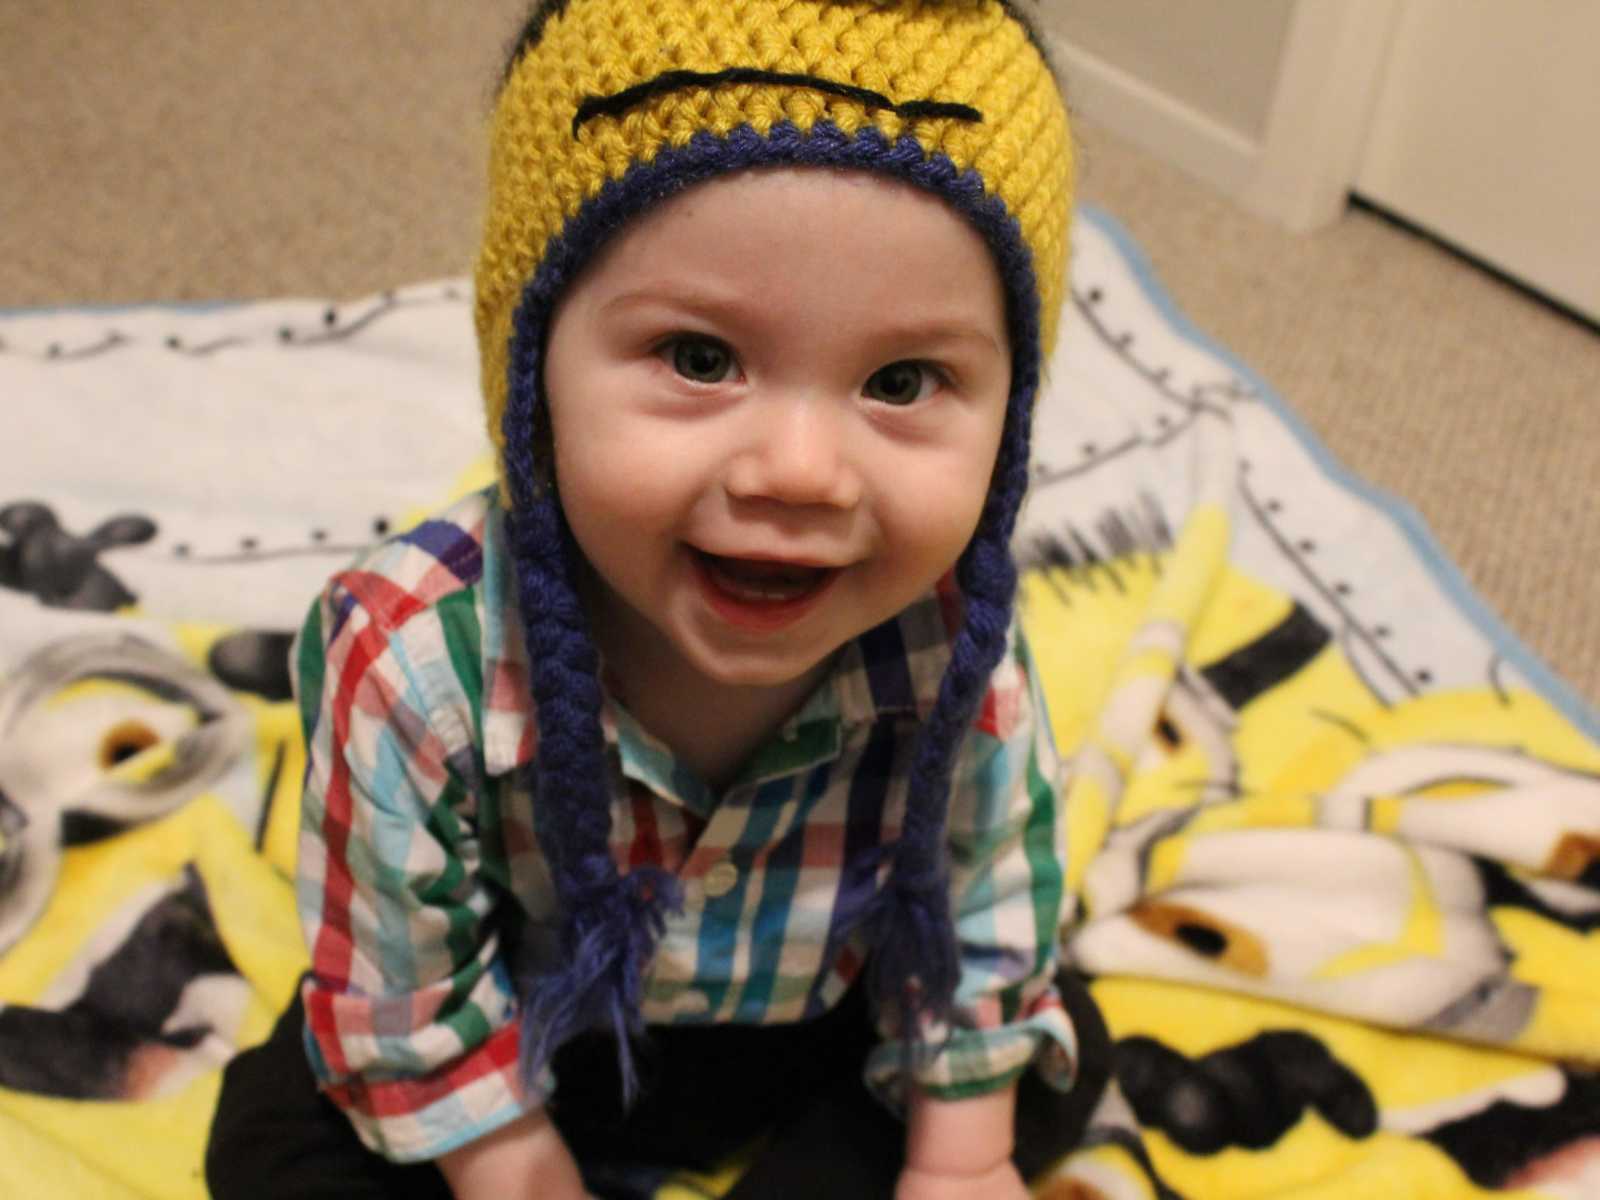 infant boy sits on minion blanket while looking up smiling with yellow knit hat on and plaid button down shirt